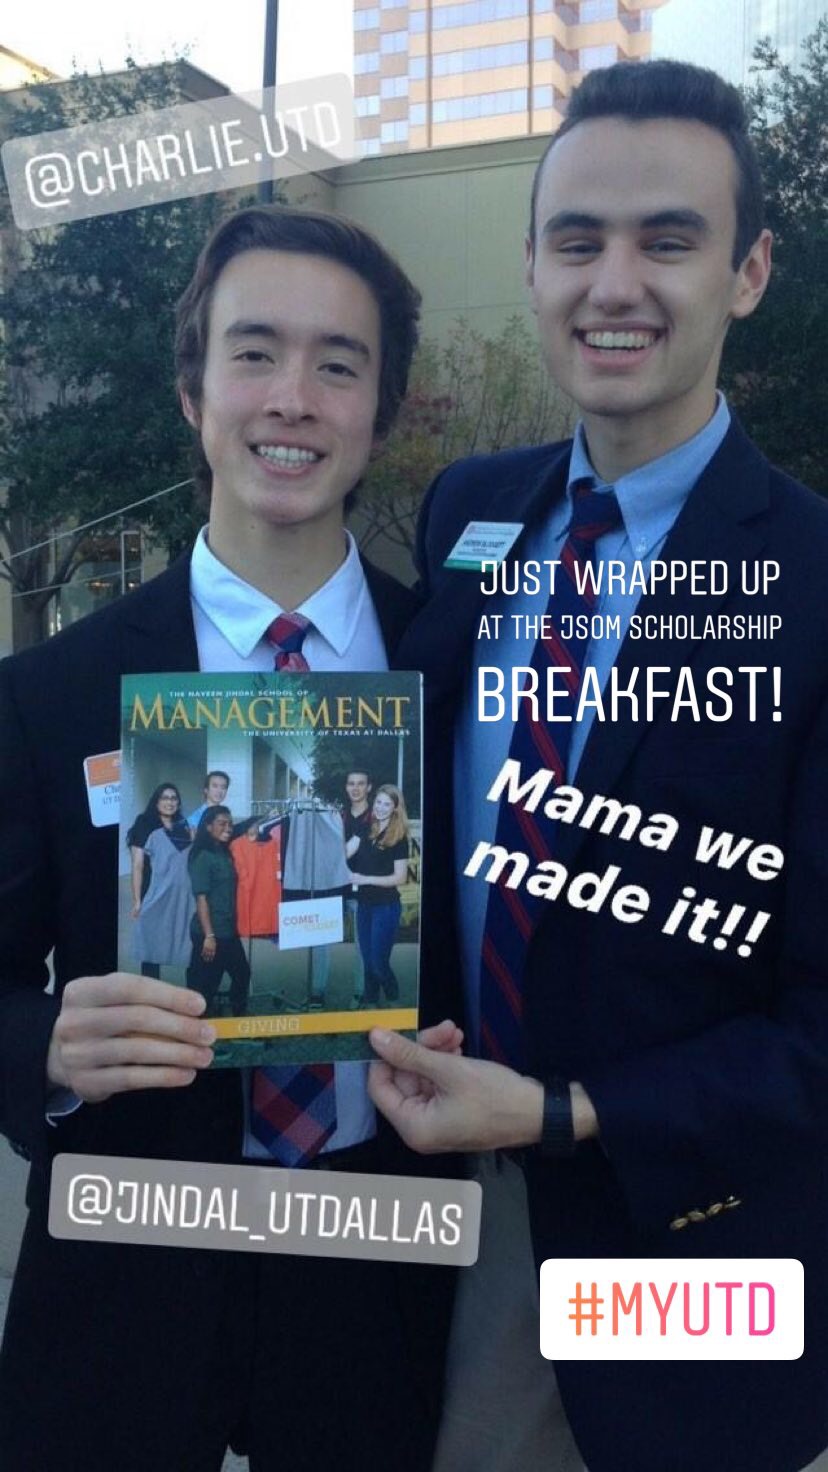 Charlie and another person, both wearing suits and ties, hold up a copy of Management magazine.